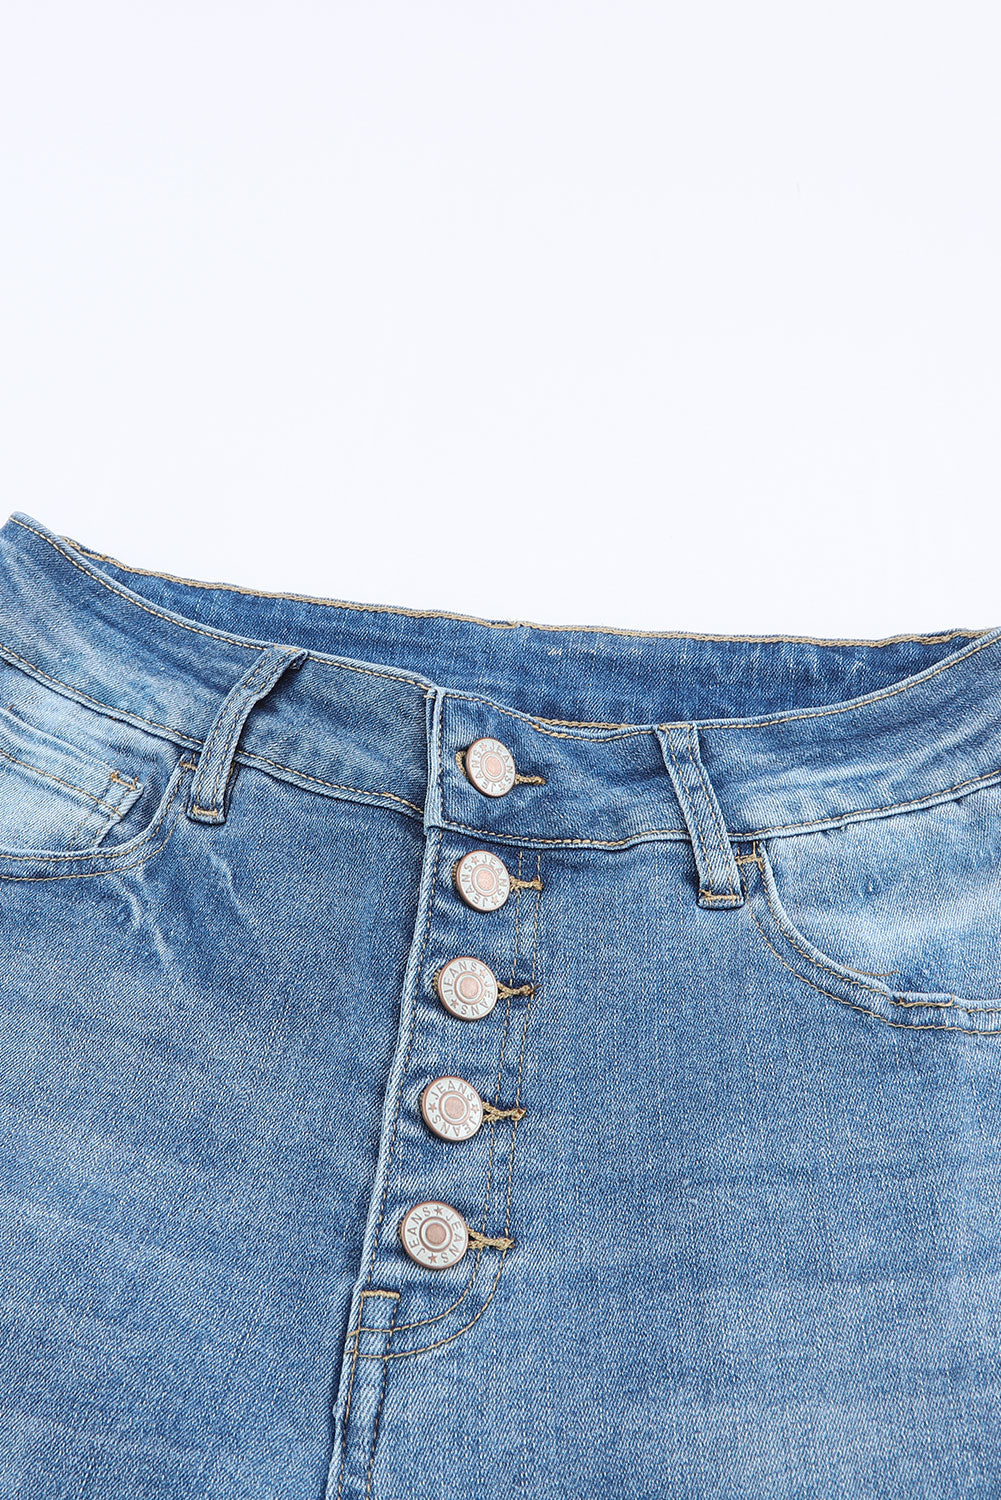 - Sky Blue High Waist Buttoned Distressed Flared Jeans - womens jeans at TFC&H Co.